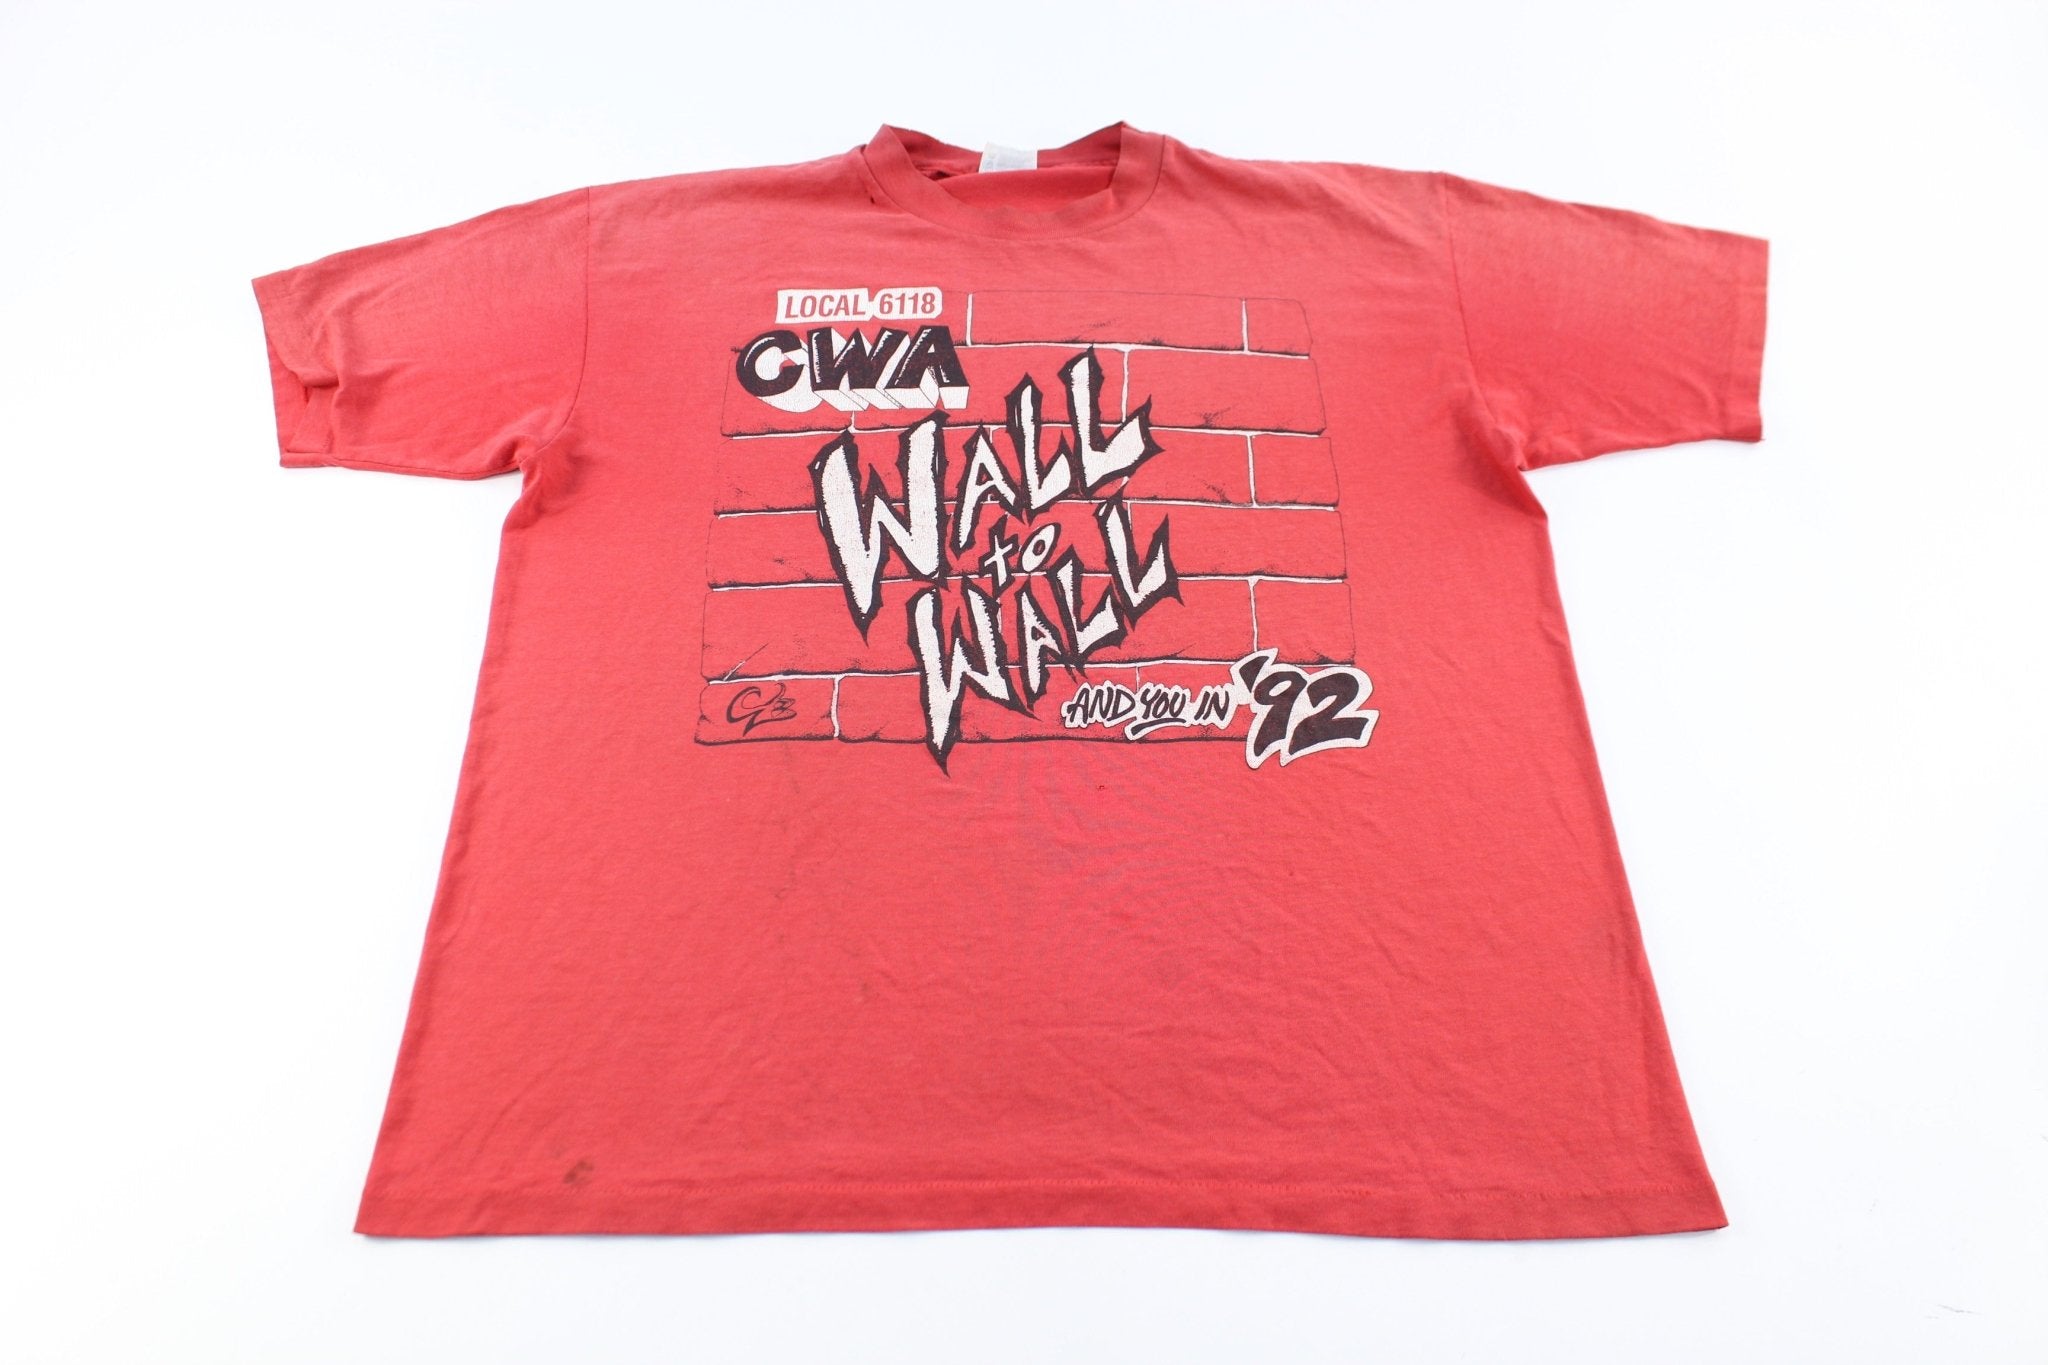 1992 Local 6118 Wall to Wall T-Shirt